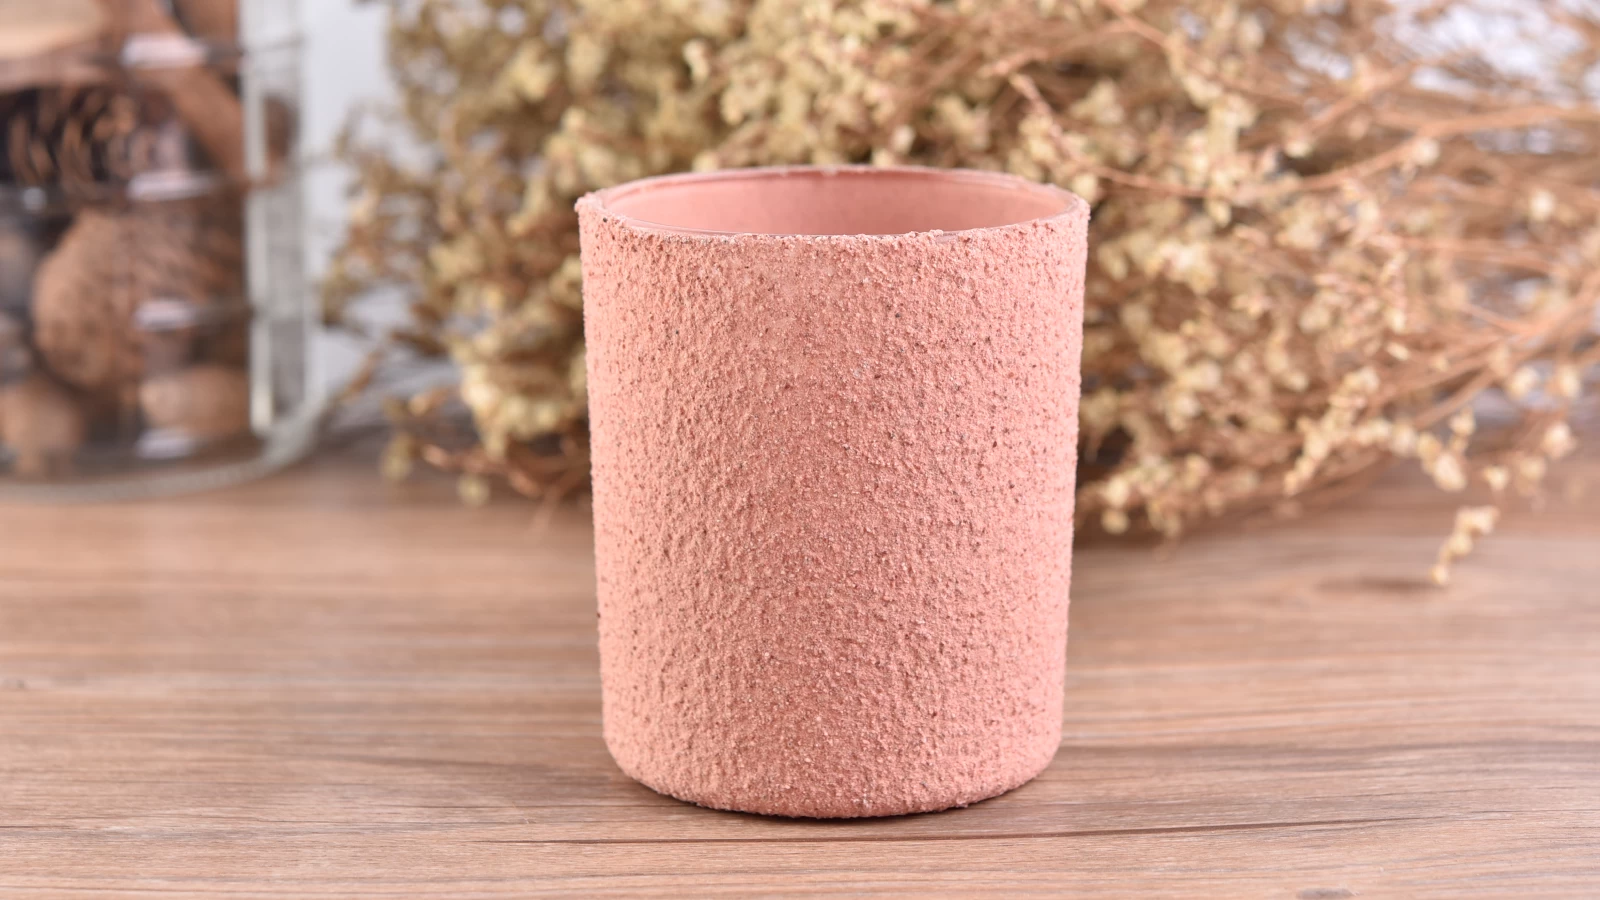 wholesale pink glass jars for candle making with home decor